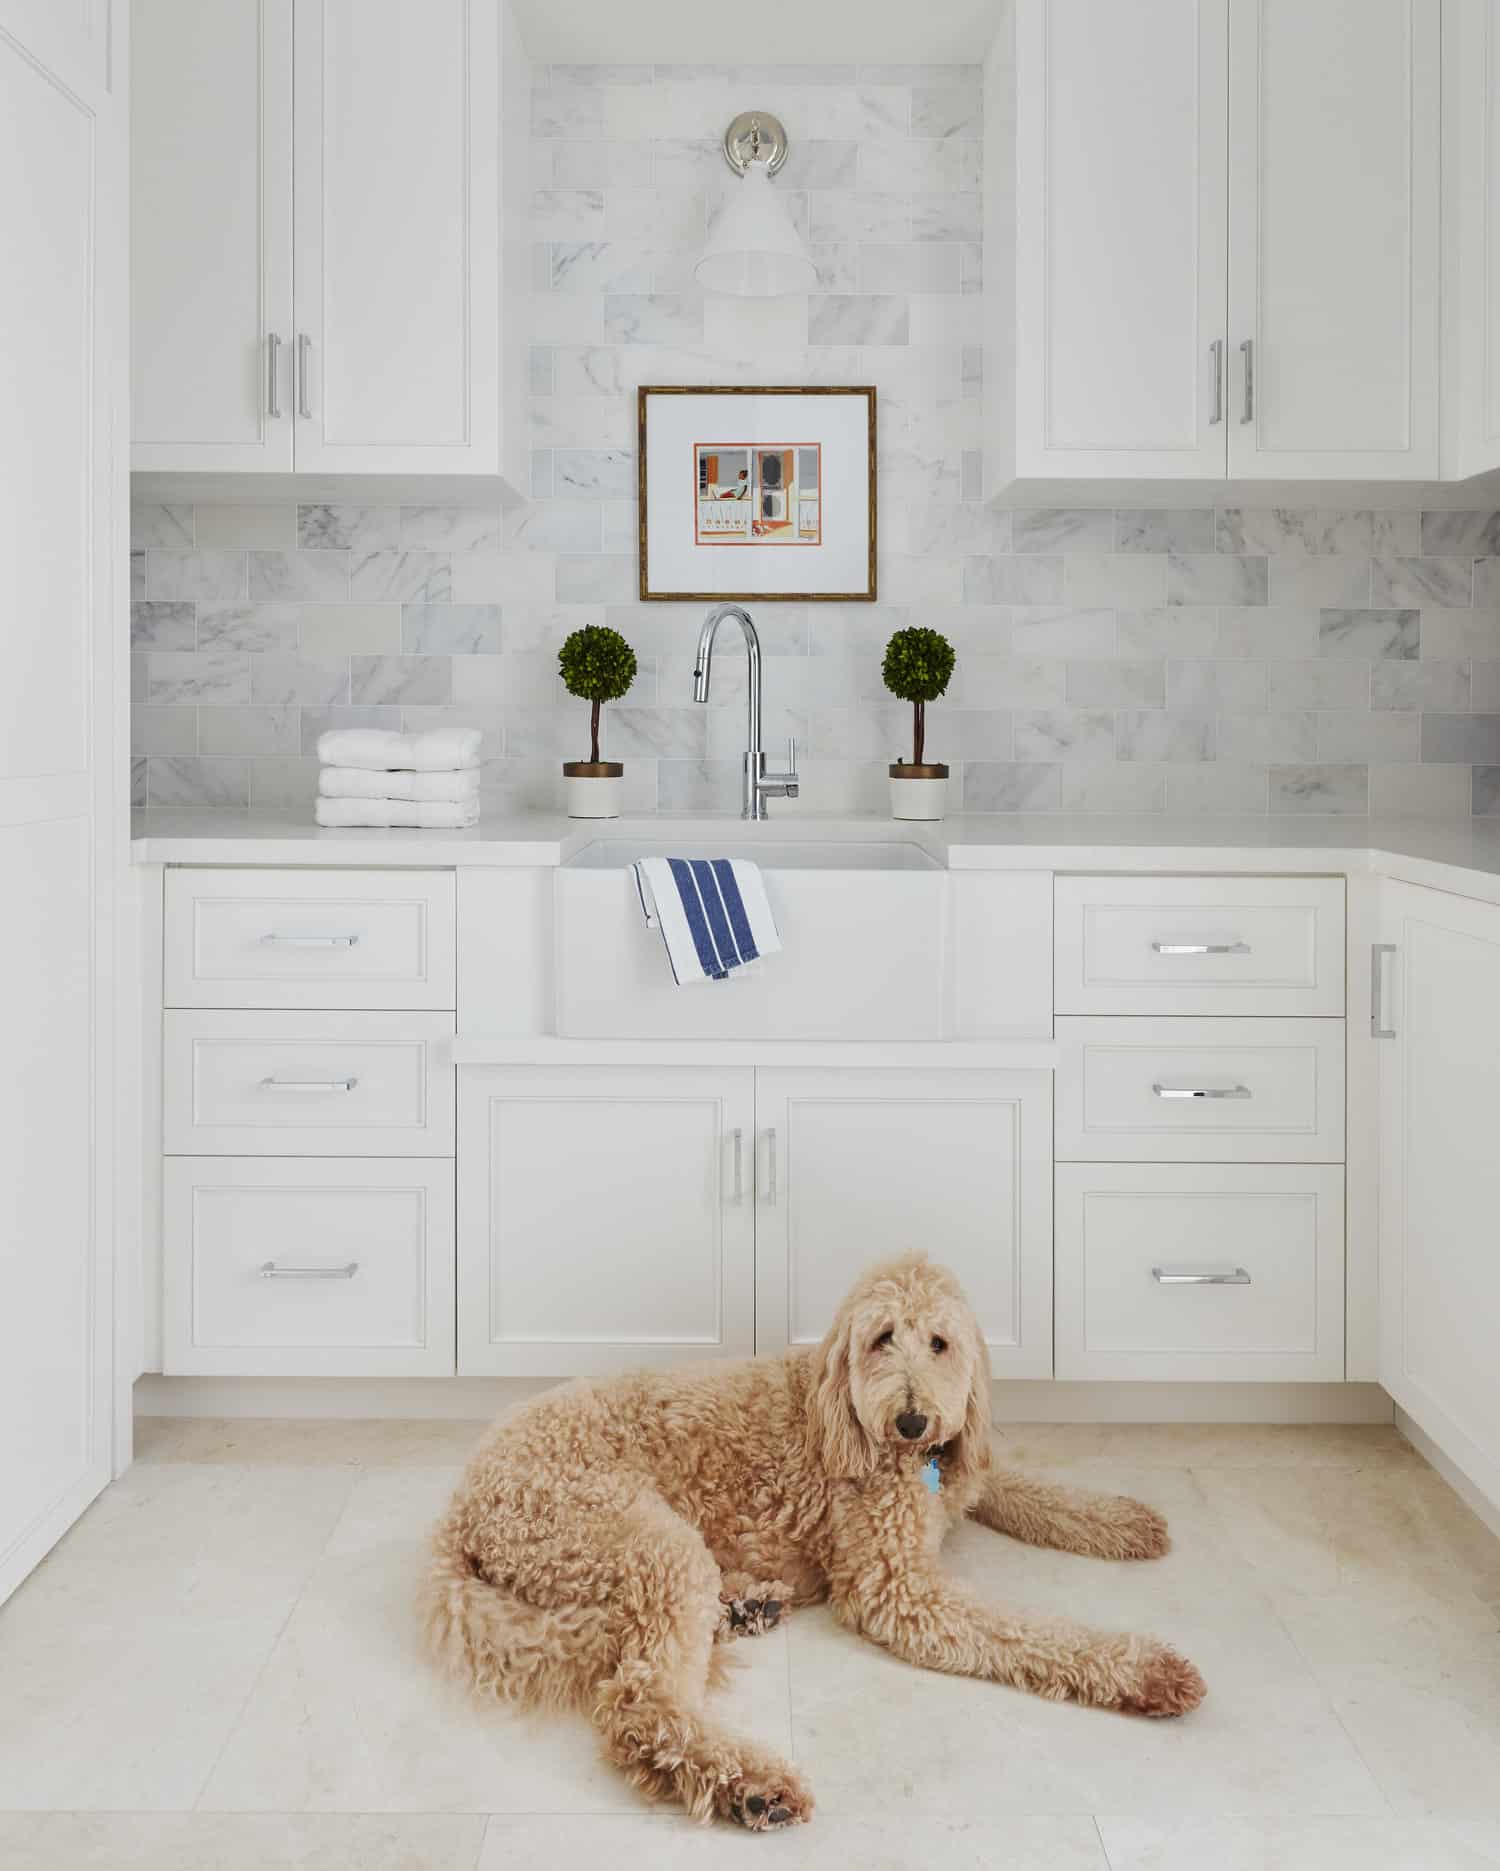 Functional Spaces Beautifully Designed by Kara Miller Interiors | Brantley Photography - Laundry room - tile floors